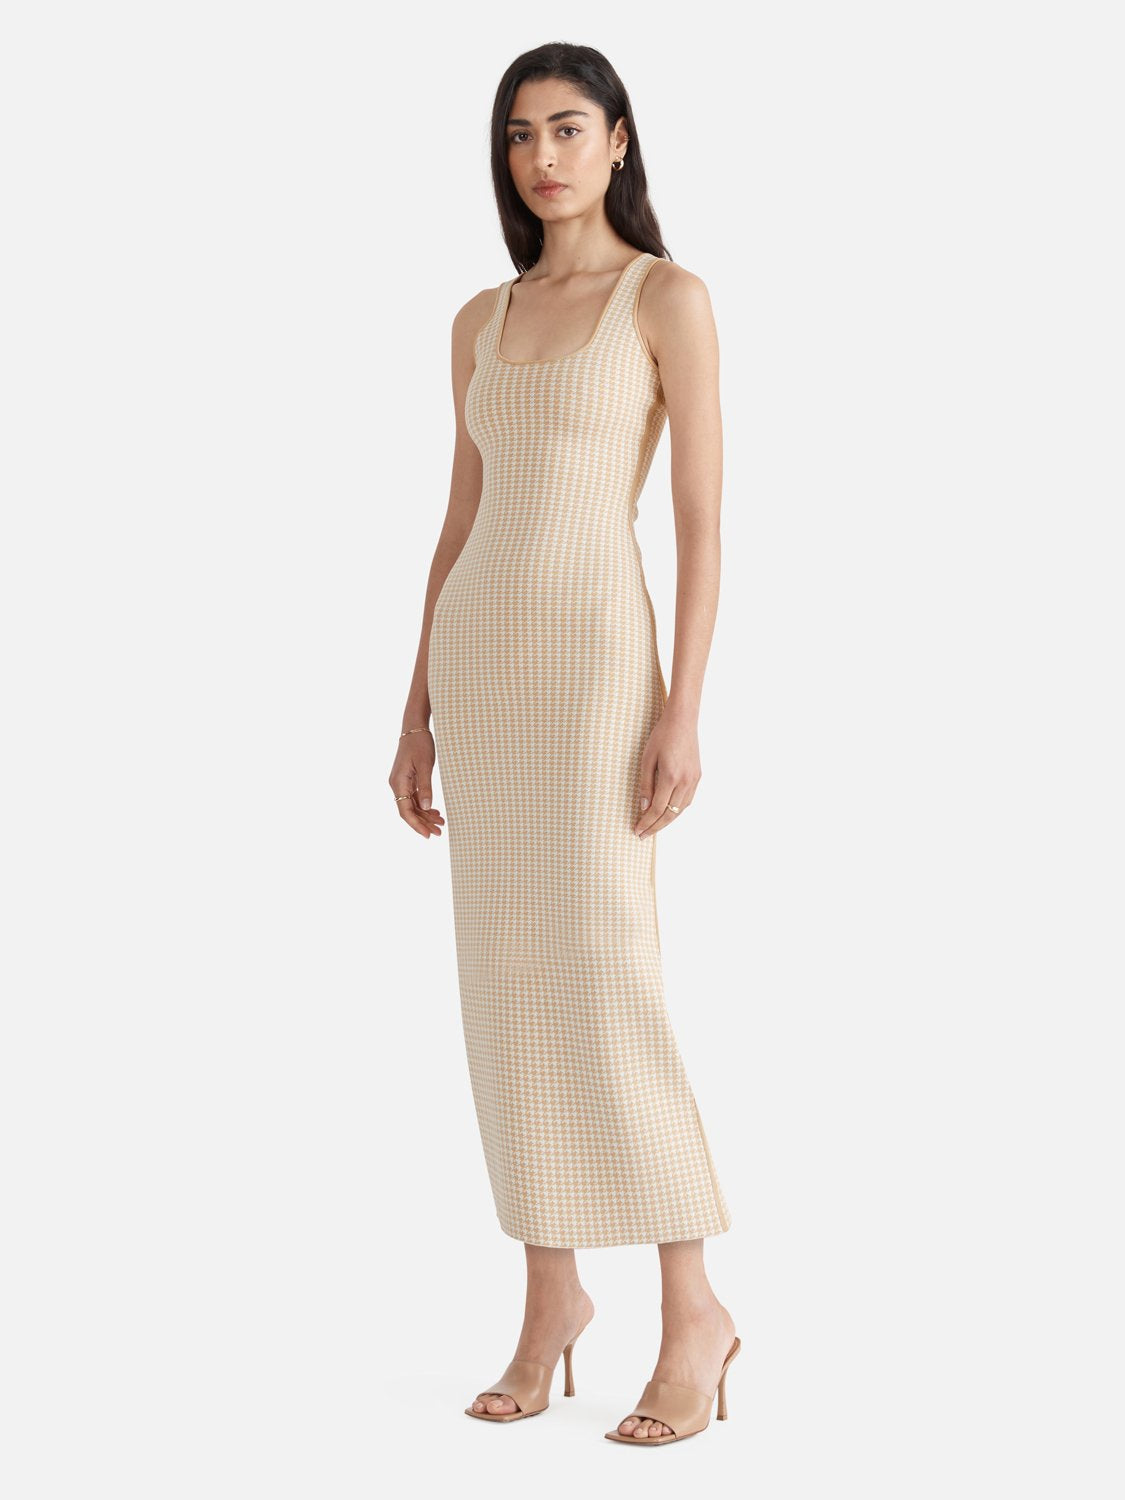 Evie Luxe Knit Maxi Dress - Houndstooth